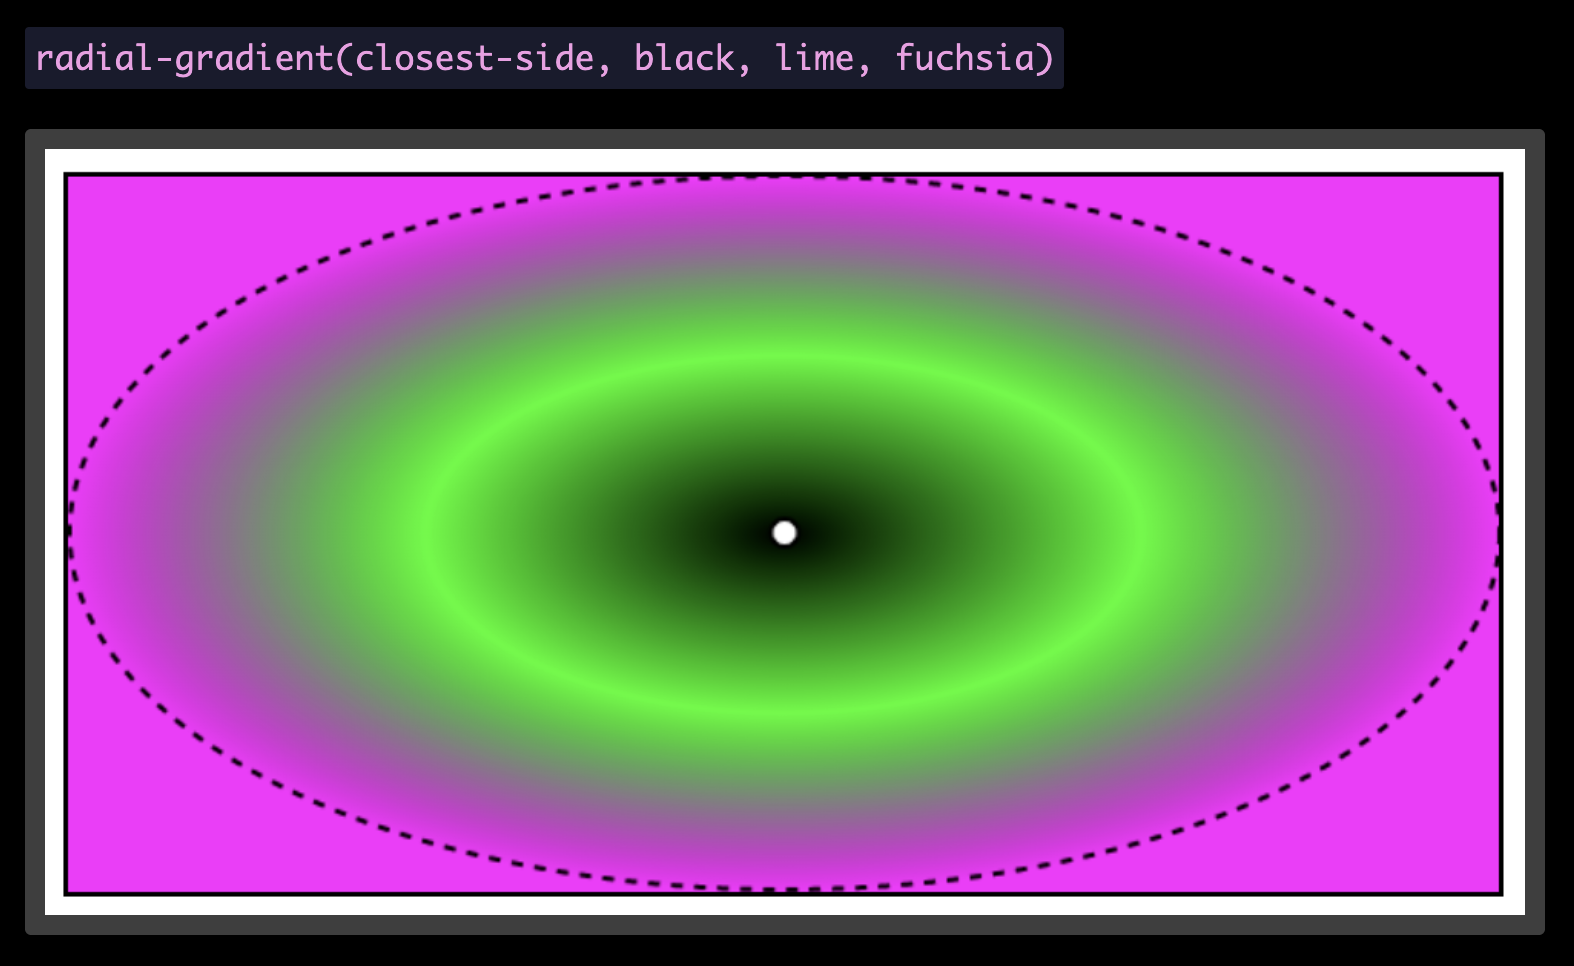 radial-gradient(closest-side, black, lime, fuchsia)